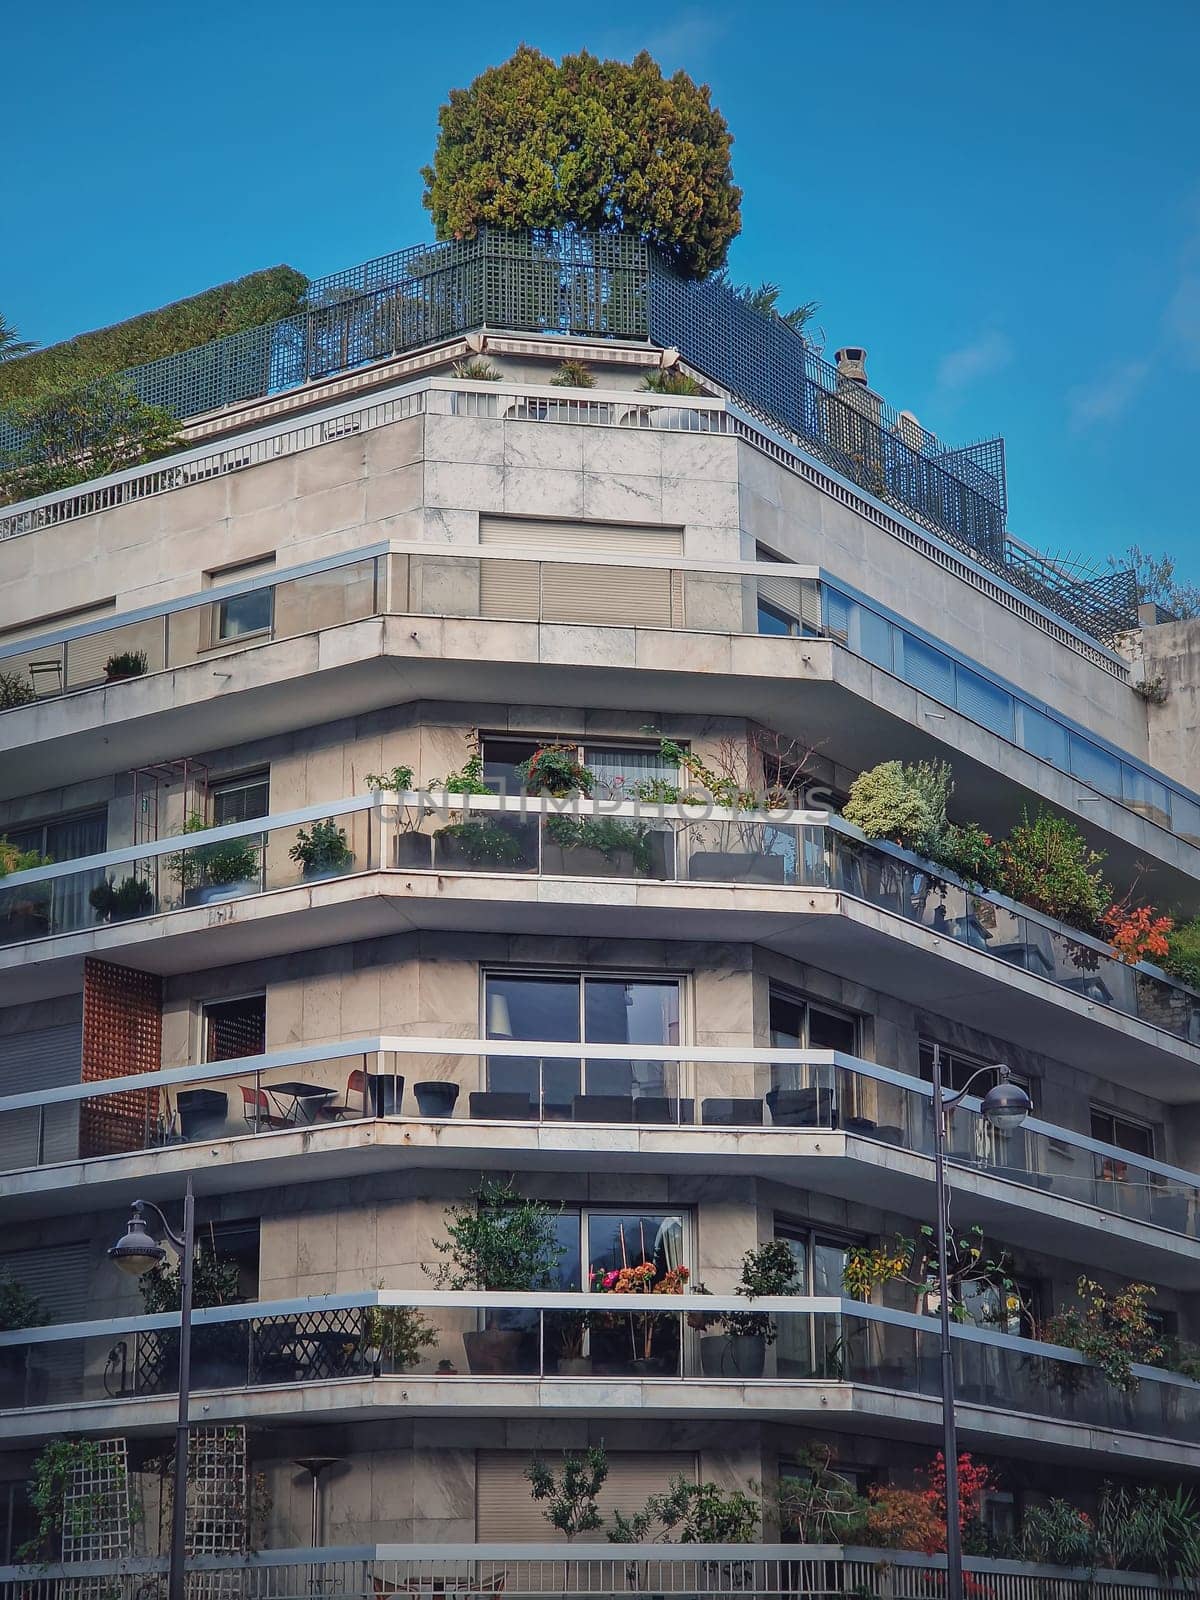 Green eco friendly building with different plants and trees growing on the balconies and on top of the roof in Paris, France. City environment, greening concept